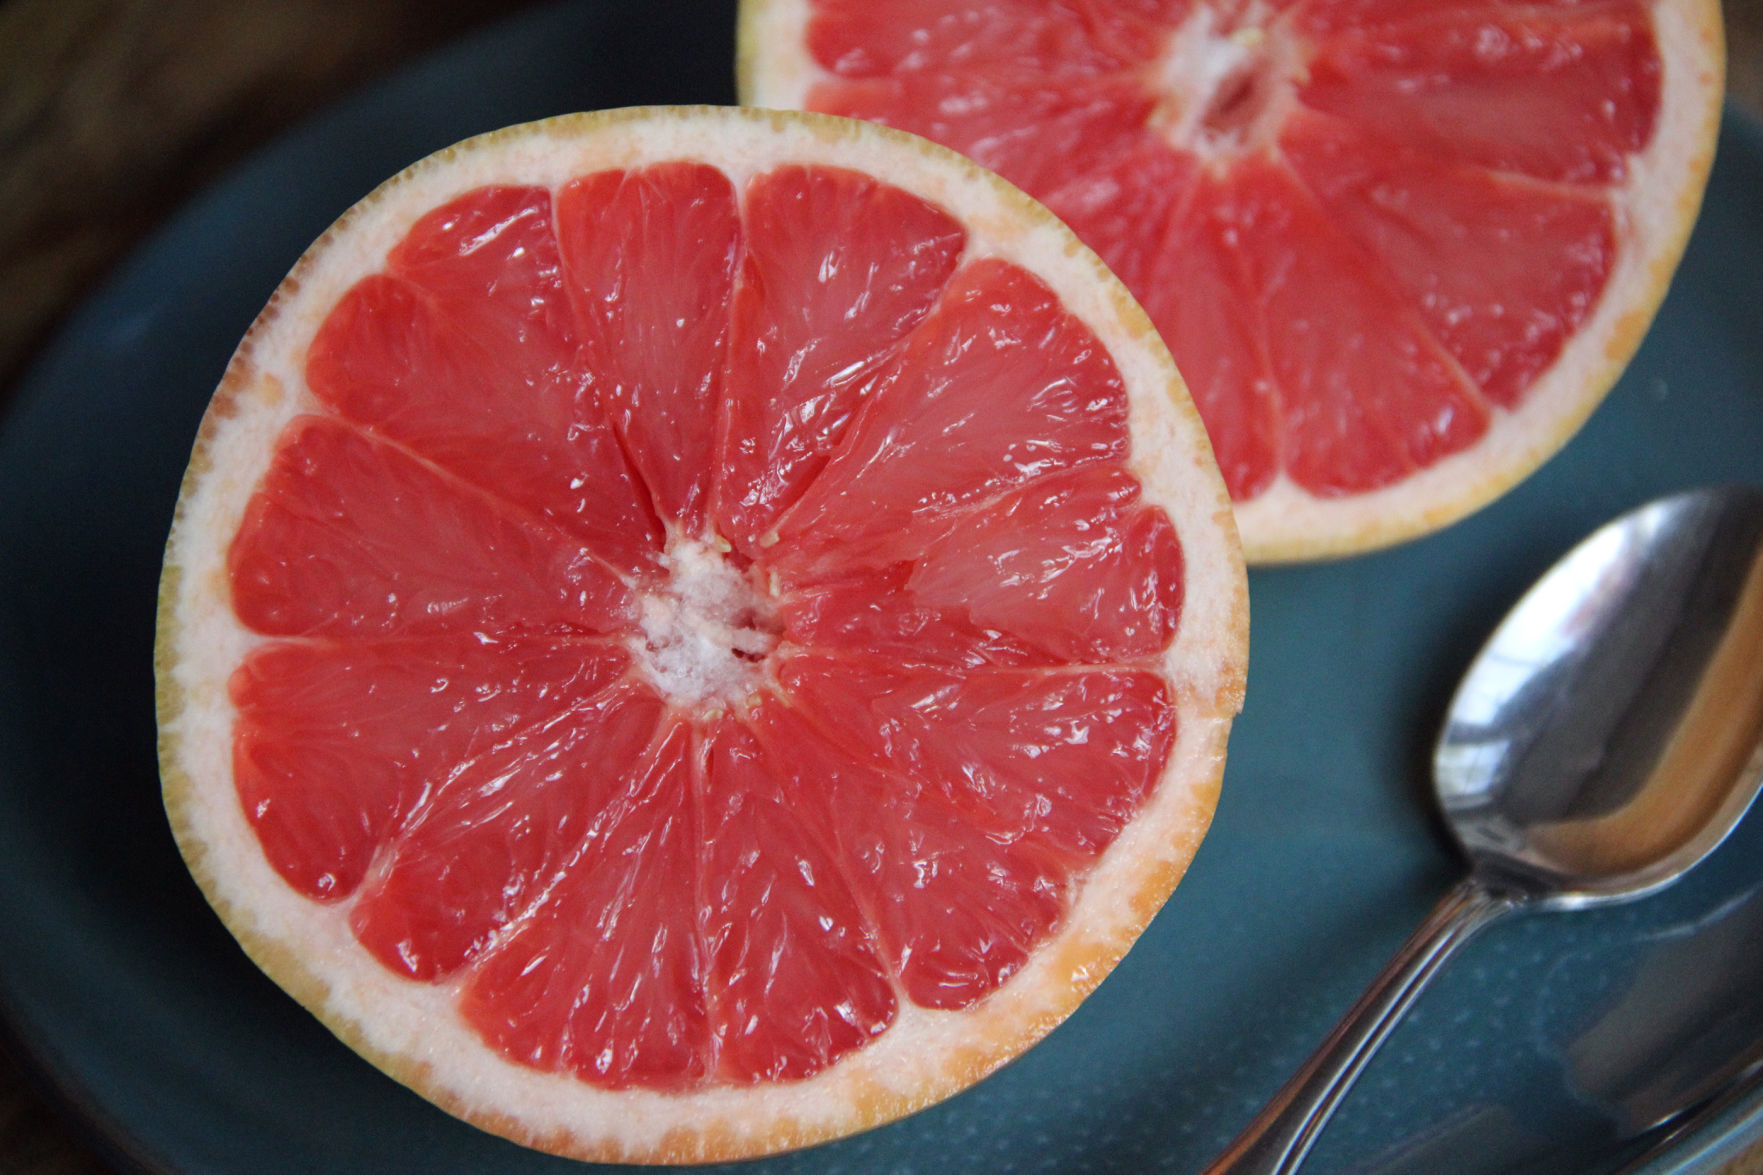 Eat you grapefruit when diazepam can why taking